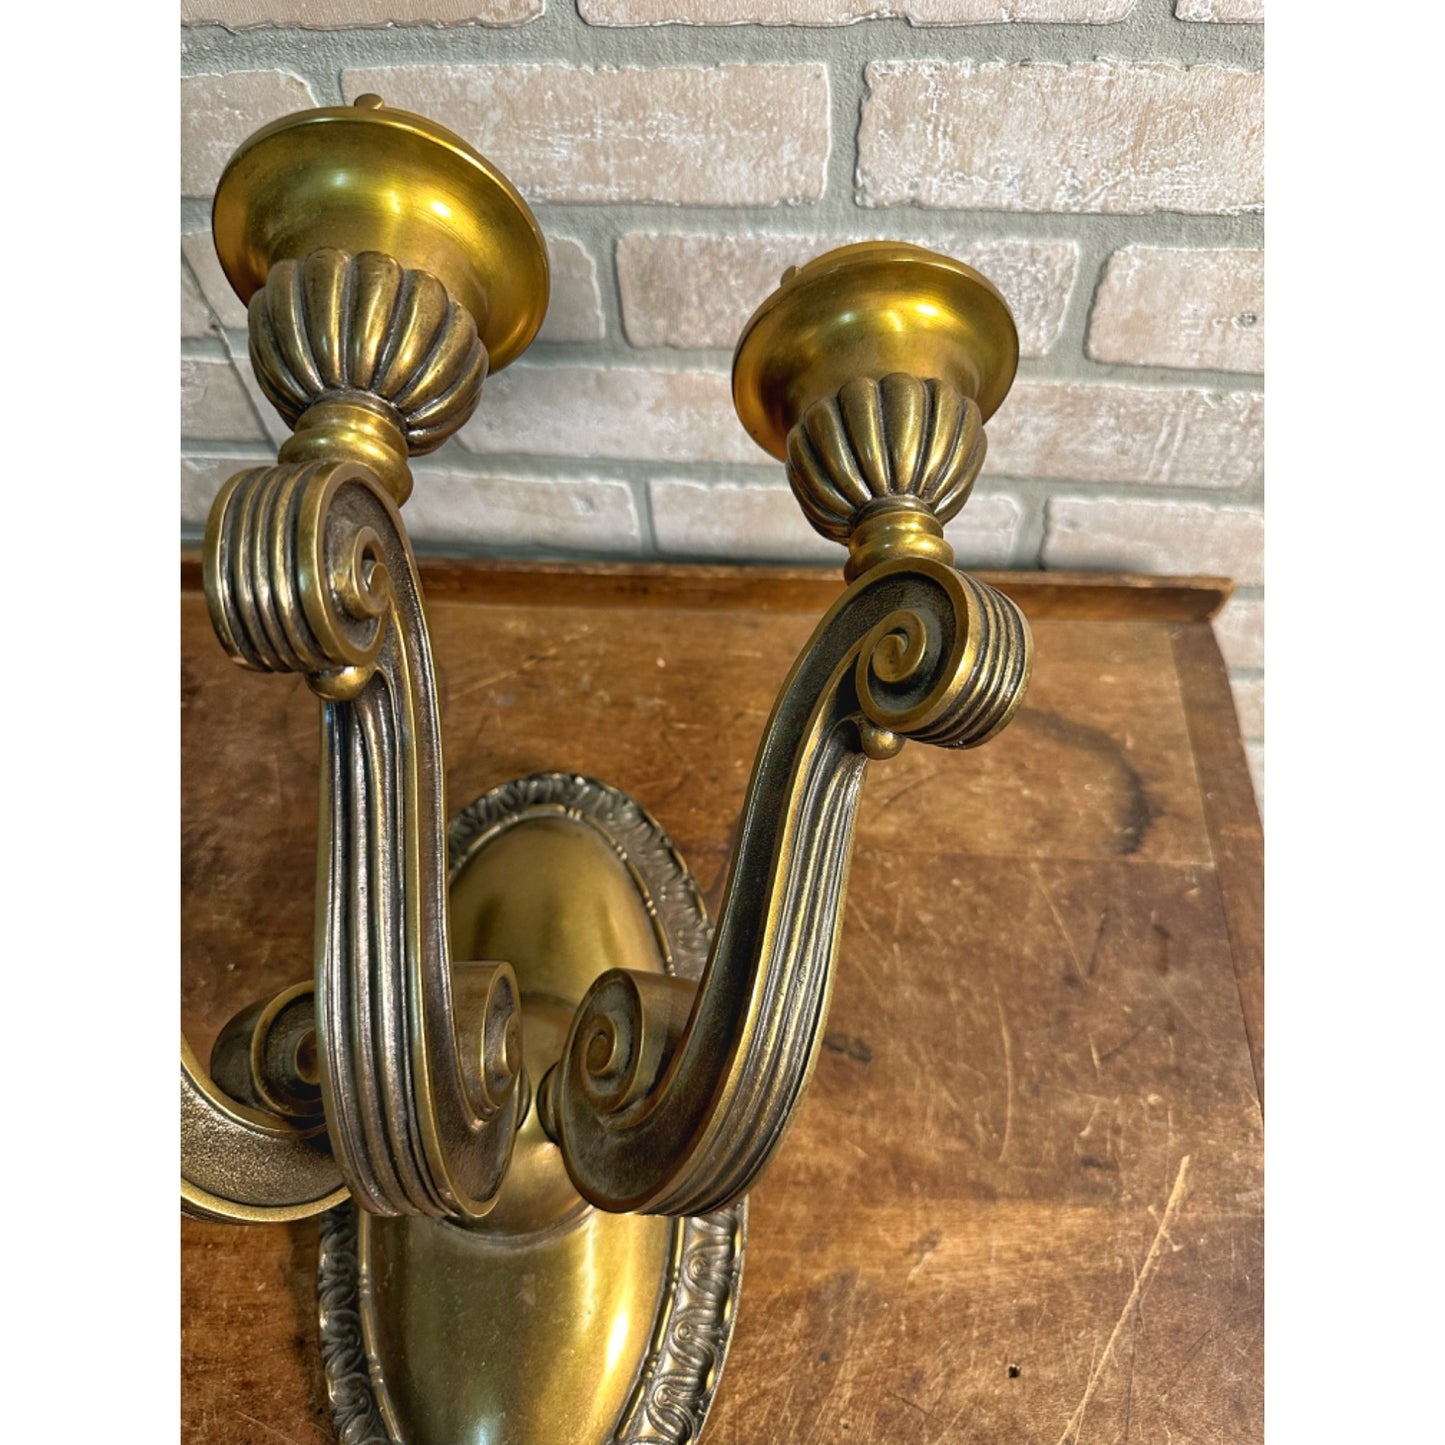 Original Brass 3-Arm Wall Sconce Light Fixture from Wisconsin State Capitol Building